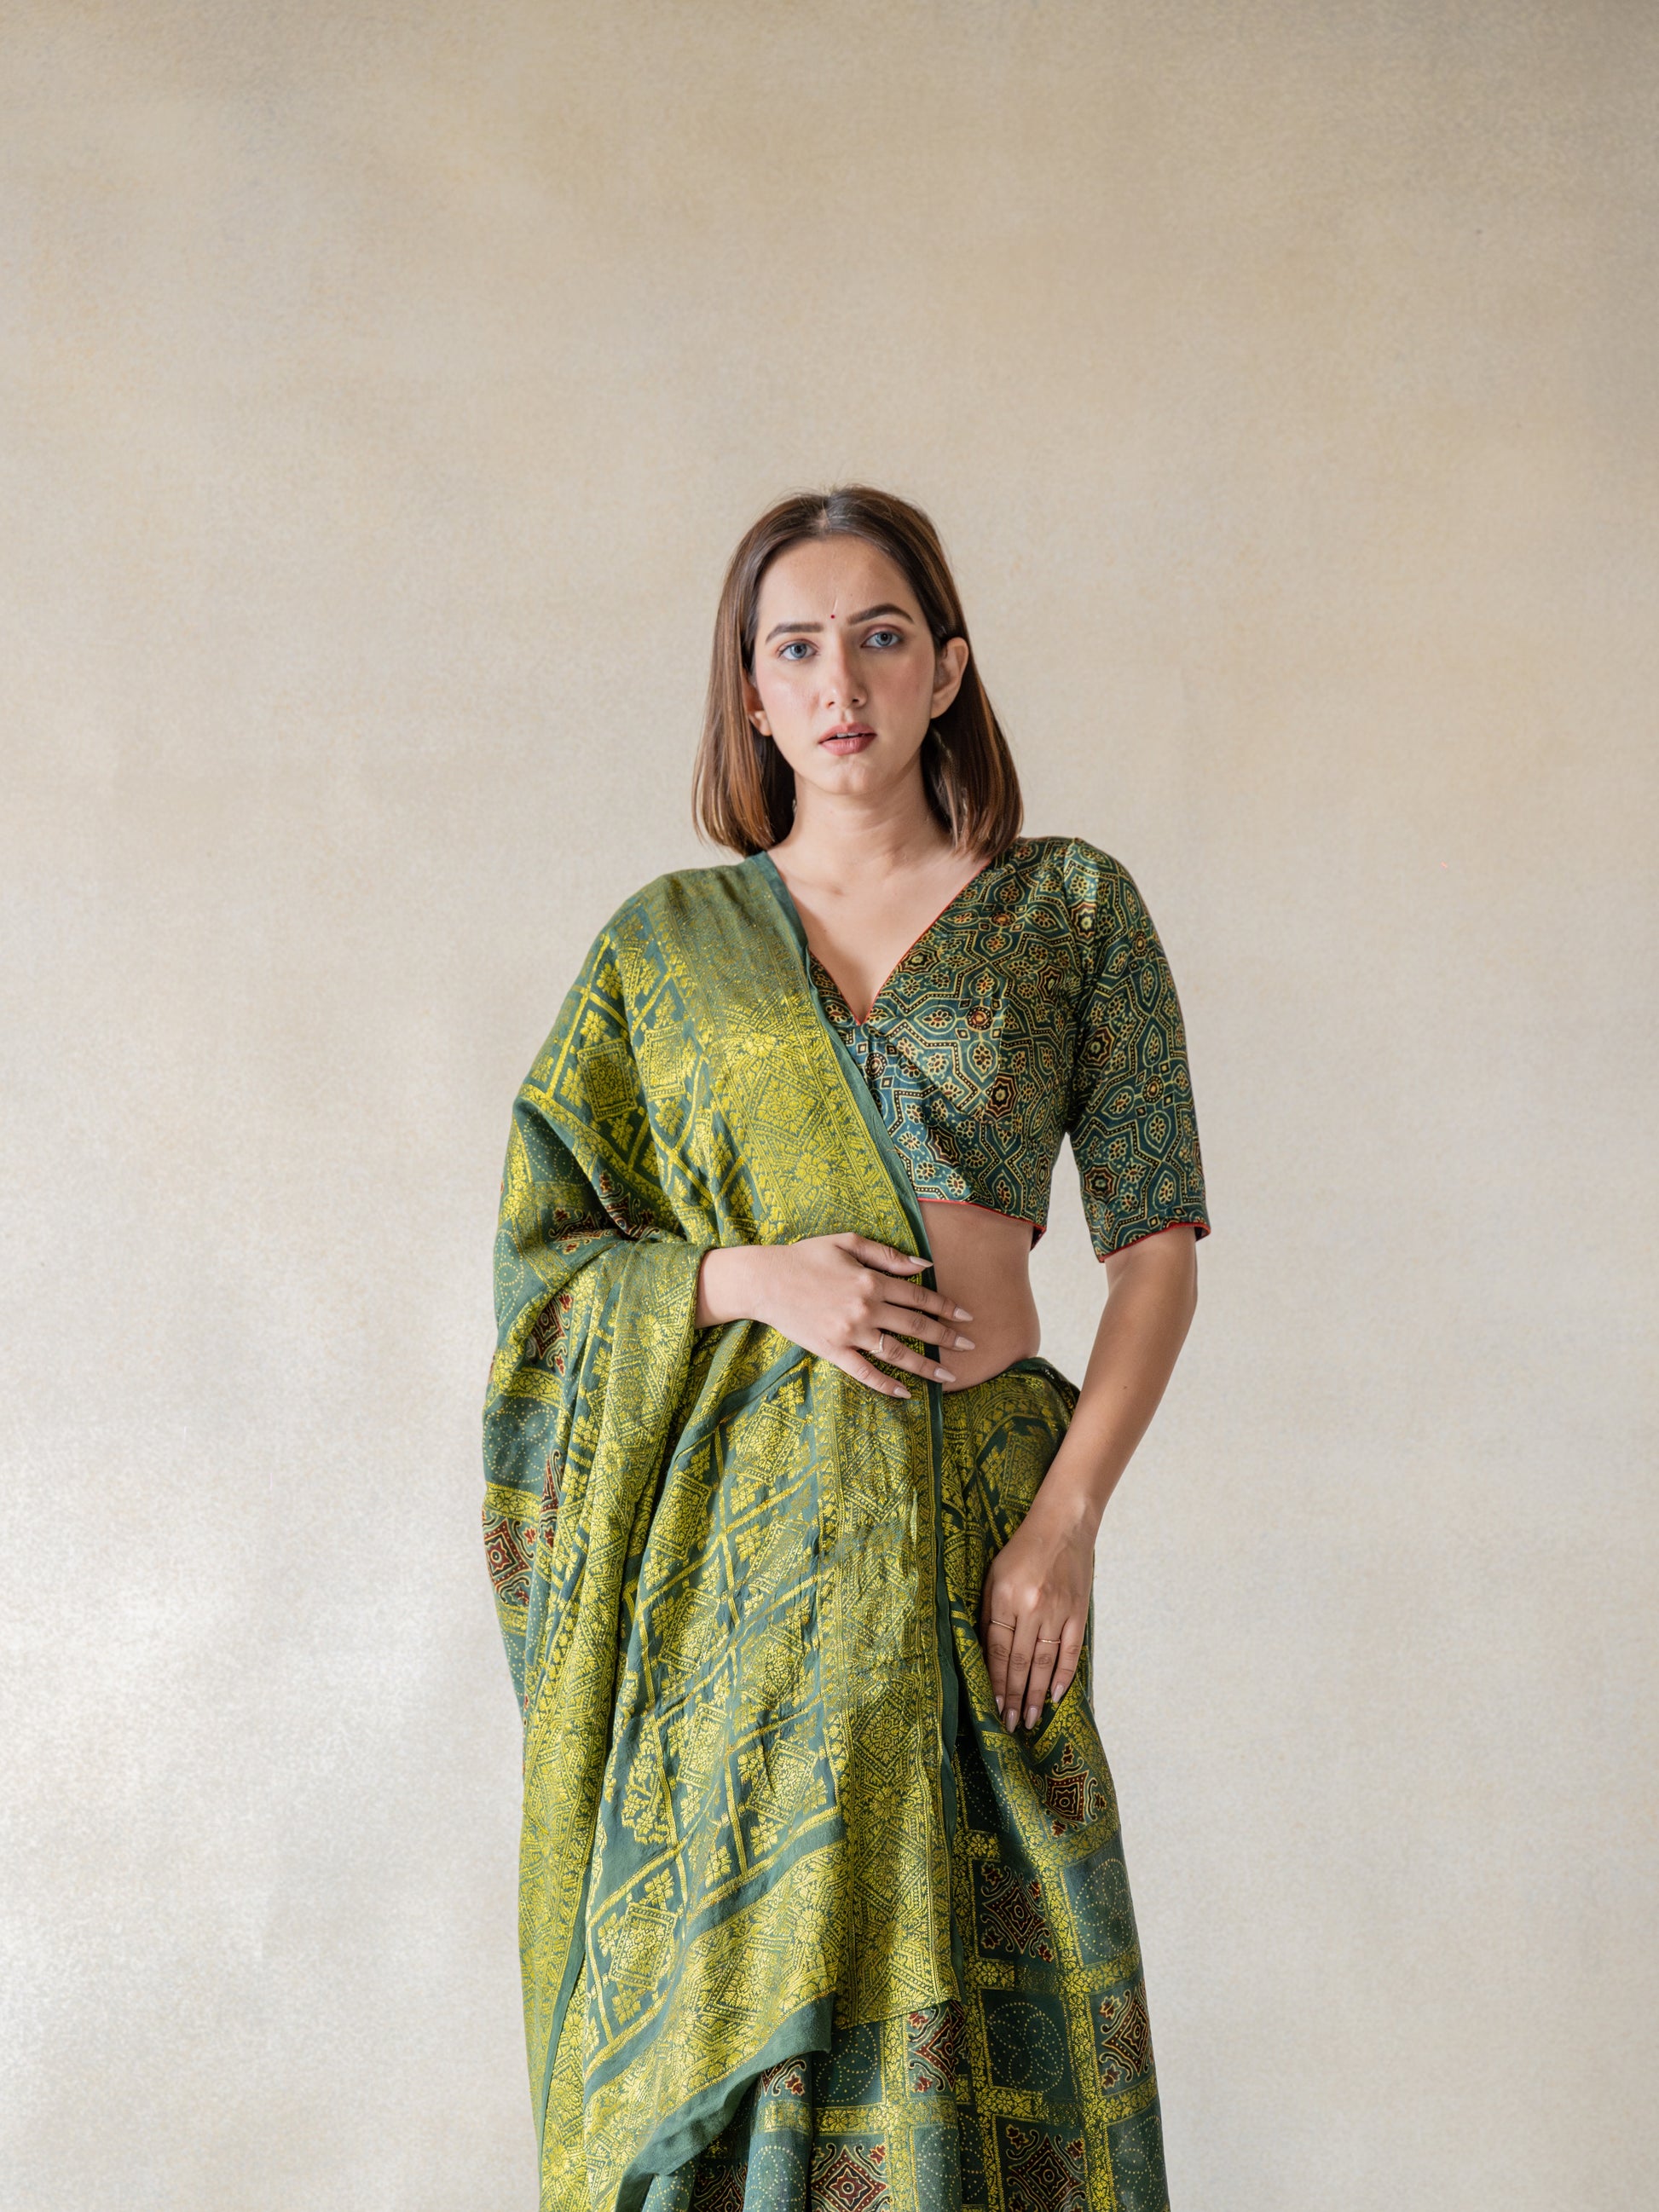 Indulge in luxury with our Green - Ajrakh Modal Silk Blouse. Handcrafted with authentic ajrakh hand block printing and natural green dyes, this blouse exudes elegance. The luxurious and comfort blend of modal silk and pure cotton lining ensure breathability and style. Slow made with intricate details, it features a charming V neck in front and button closure in the back. An exclusive piece for those who appreciate sophistication.